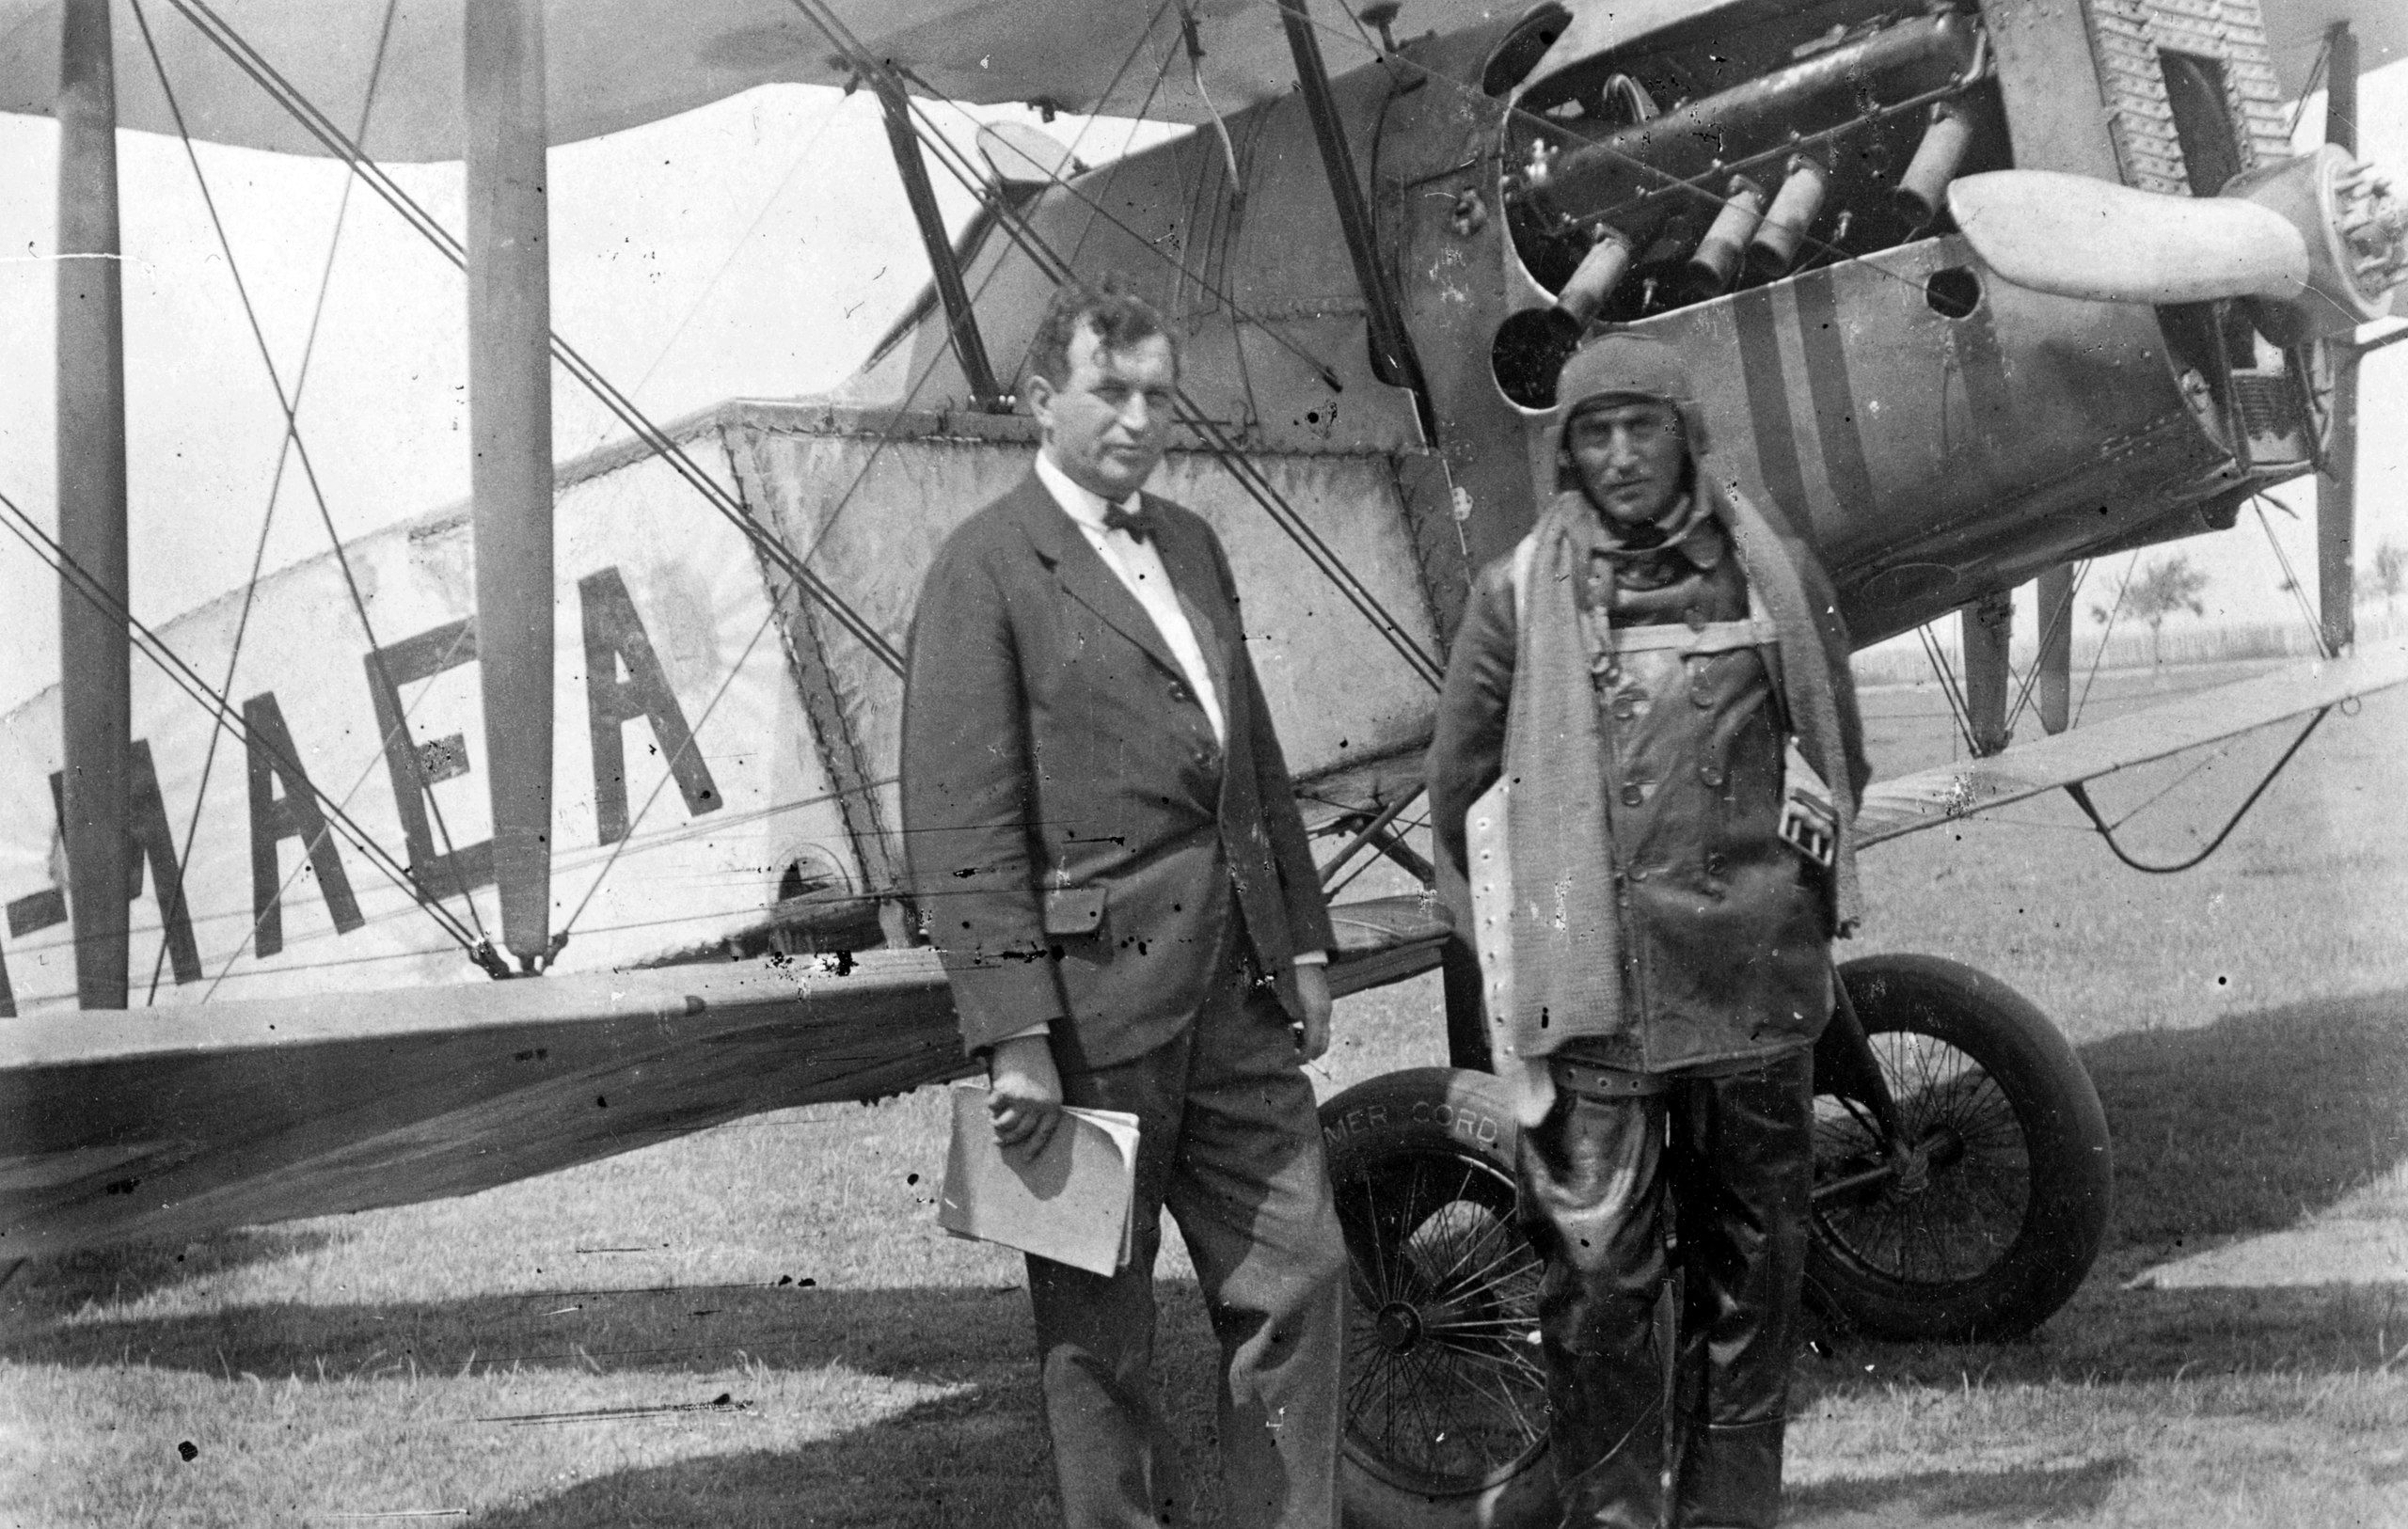 Two men, one with aviator gear and the other wearing a suit, standing in front of a Bristol F28.